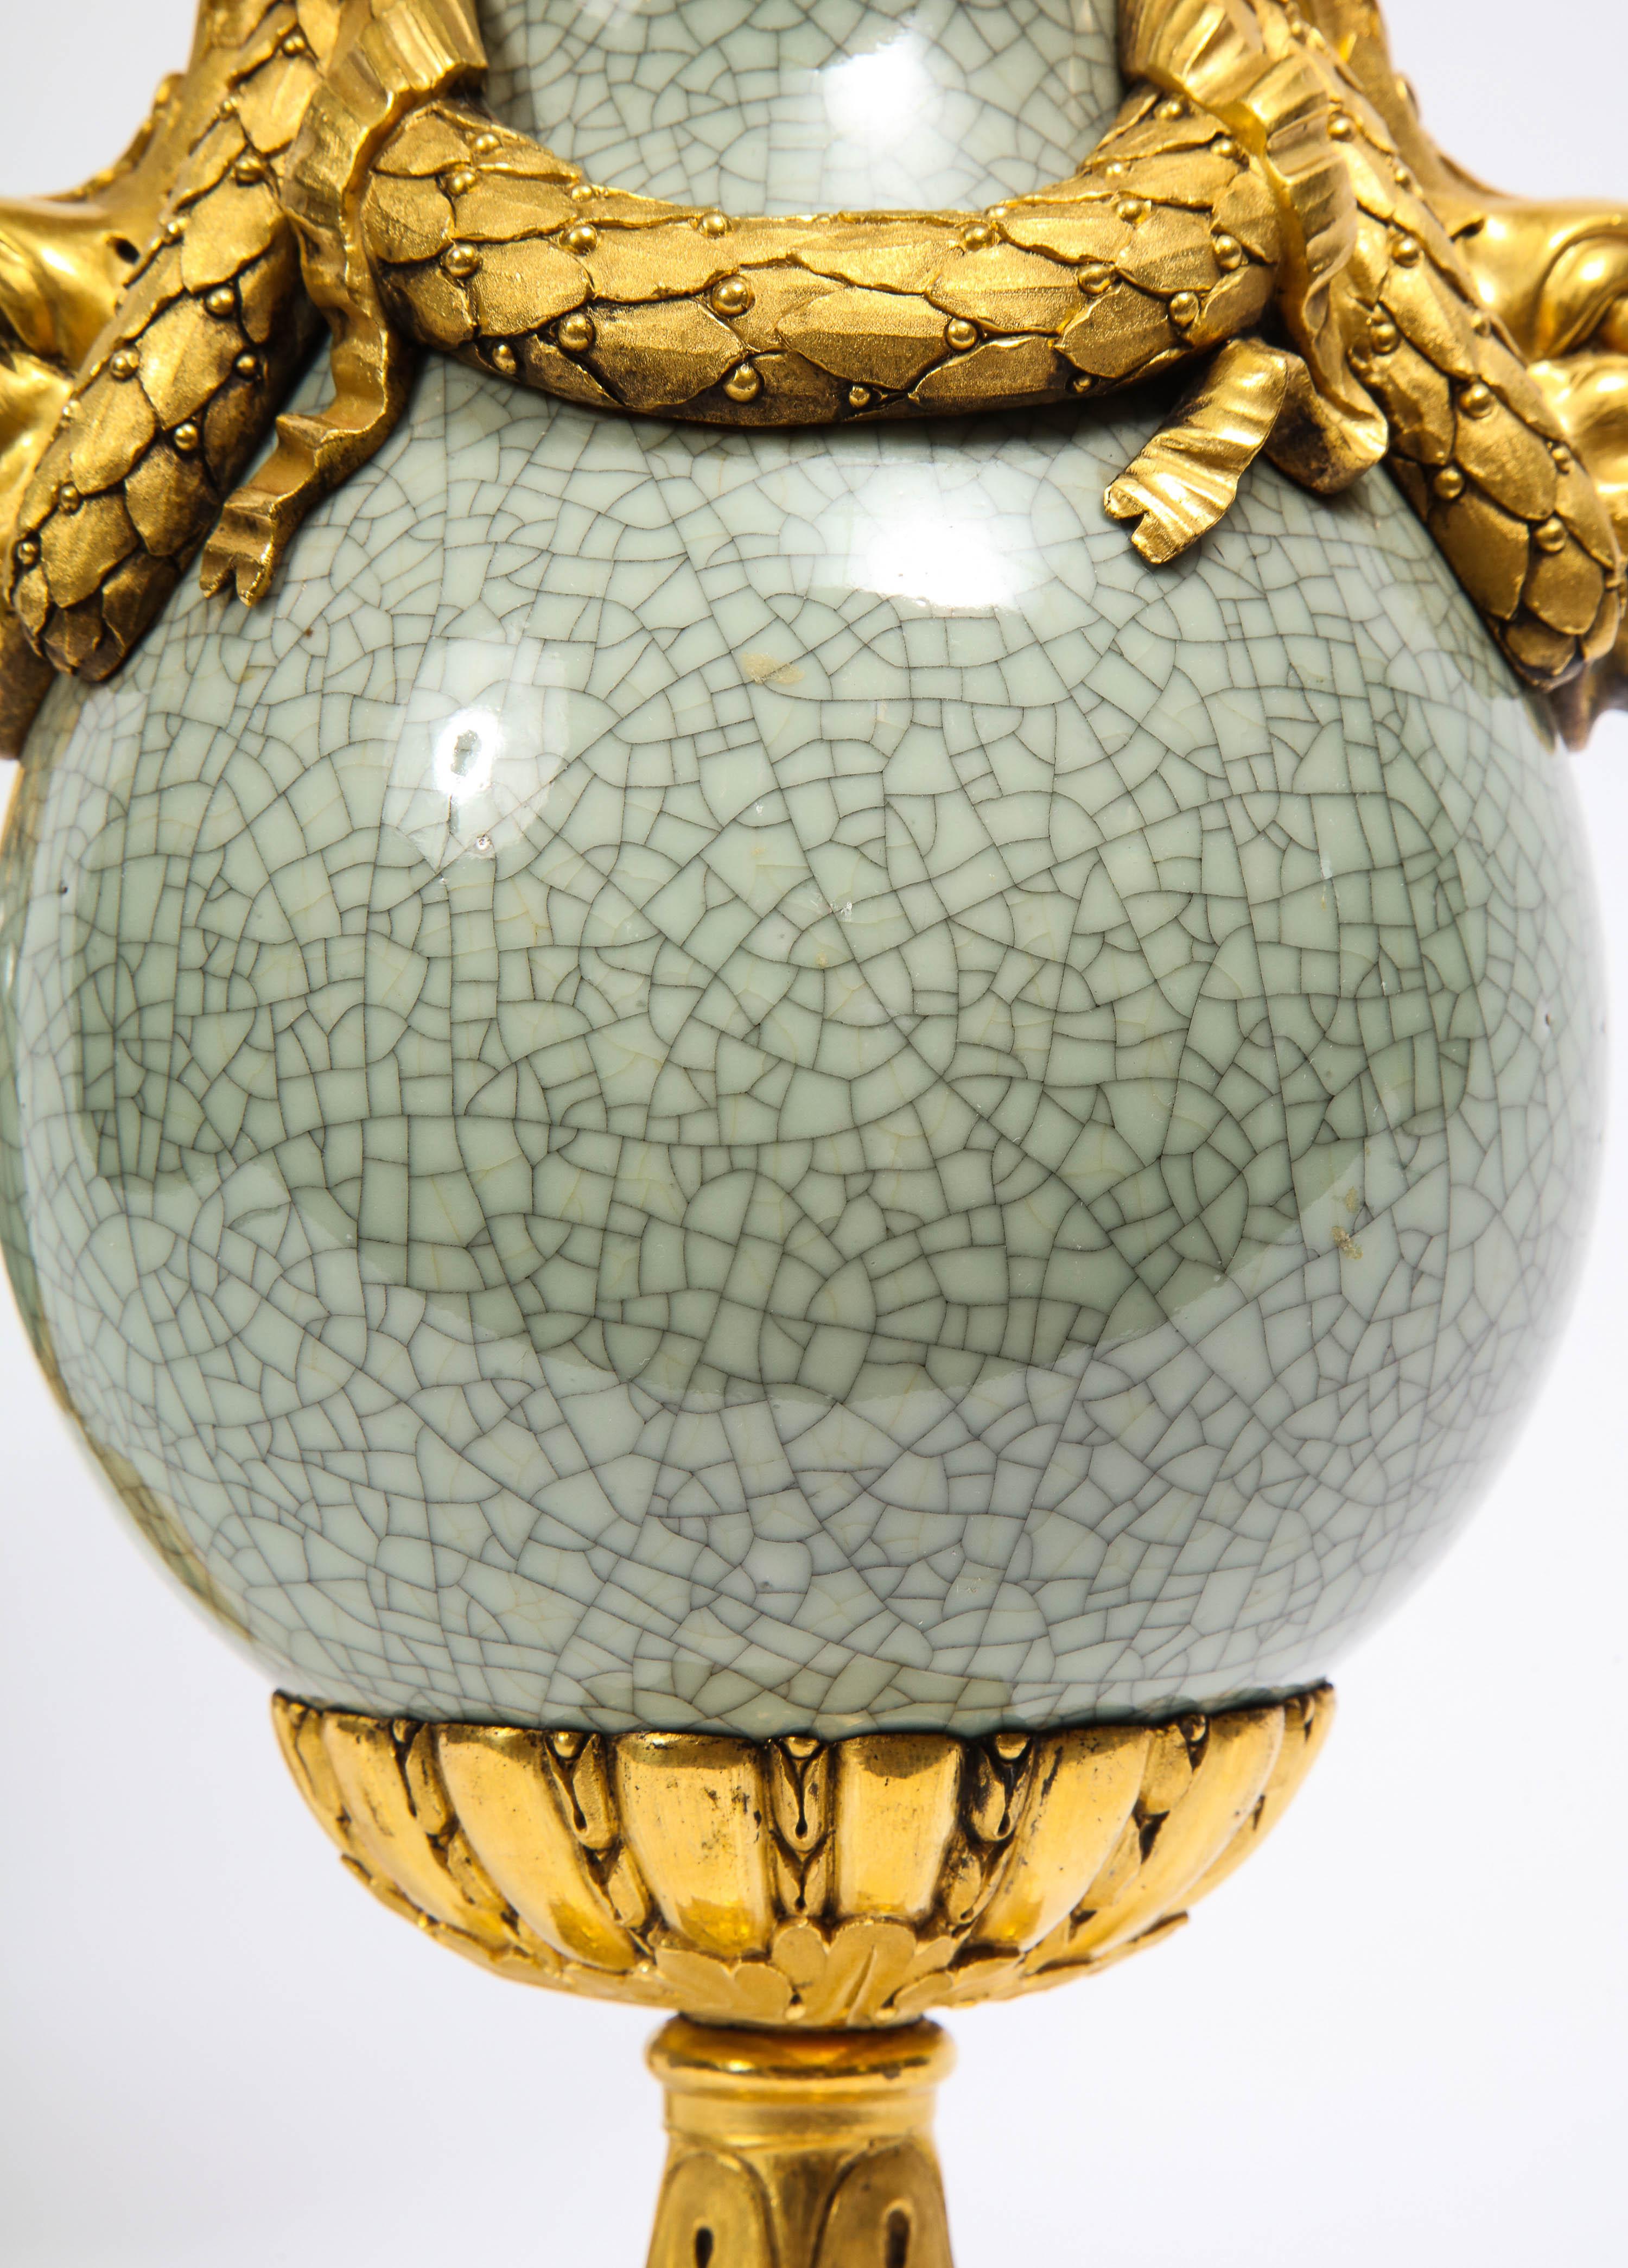 Louis XVI Ormolu-Mounted Chinese Celadon Crackle Vases with Dolphin Handles For Sale 2